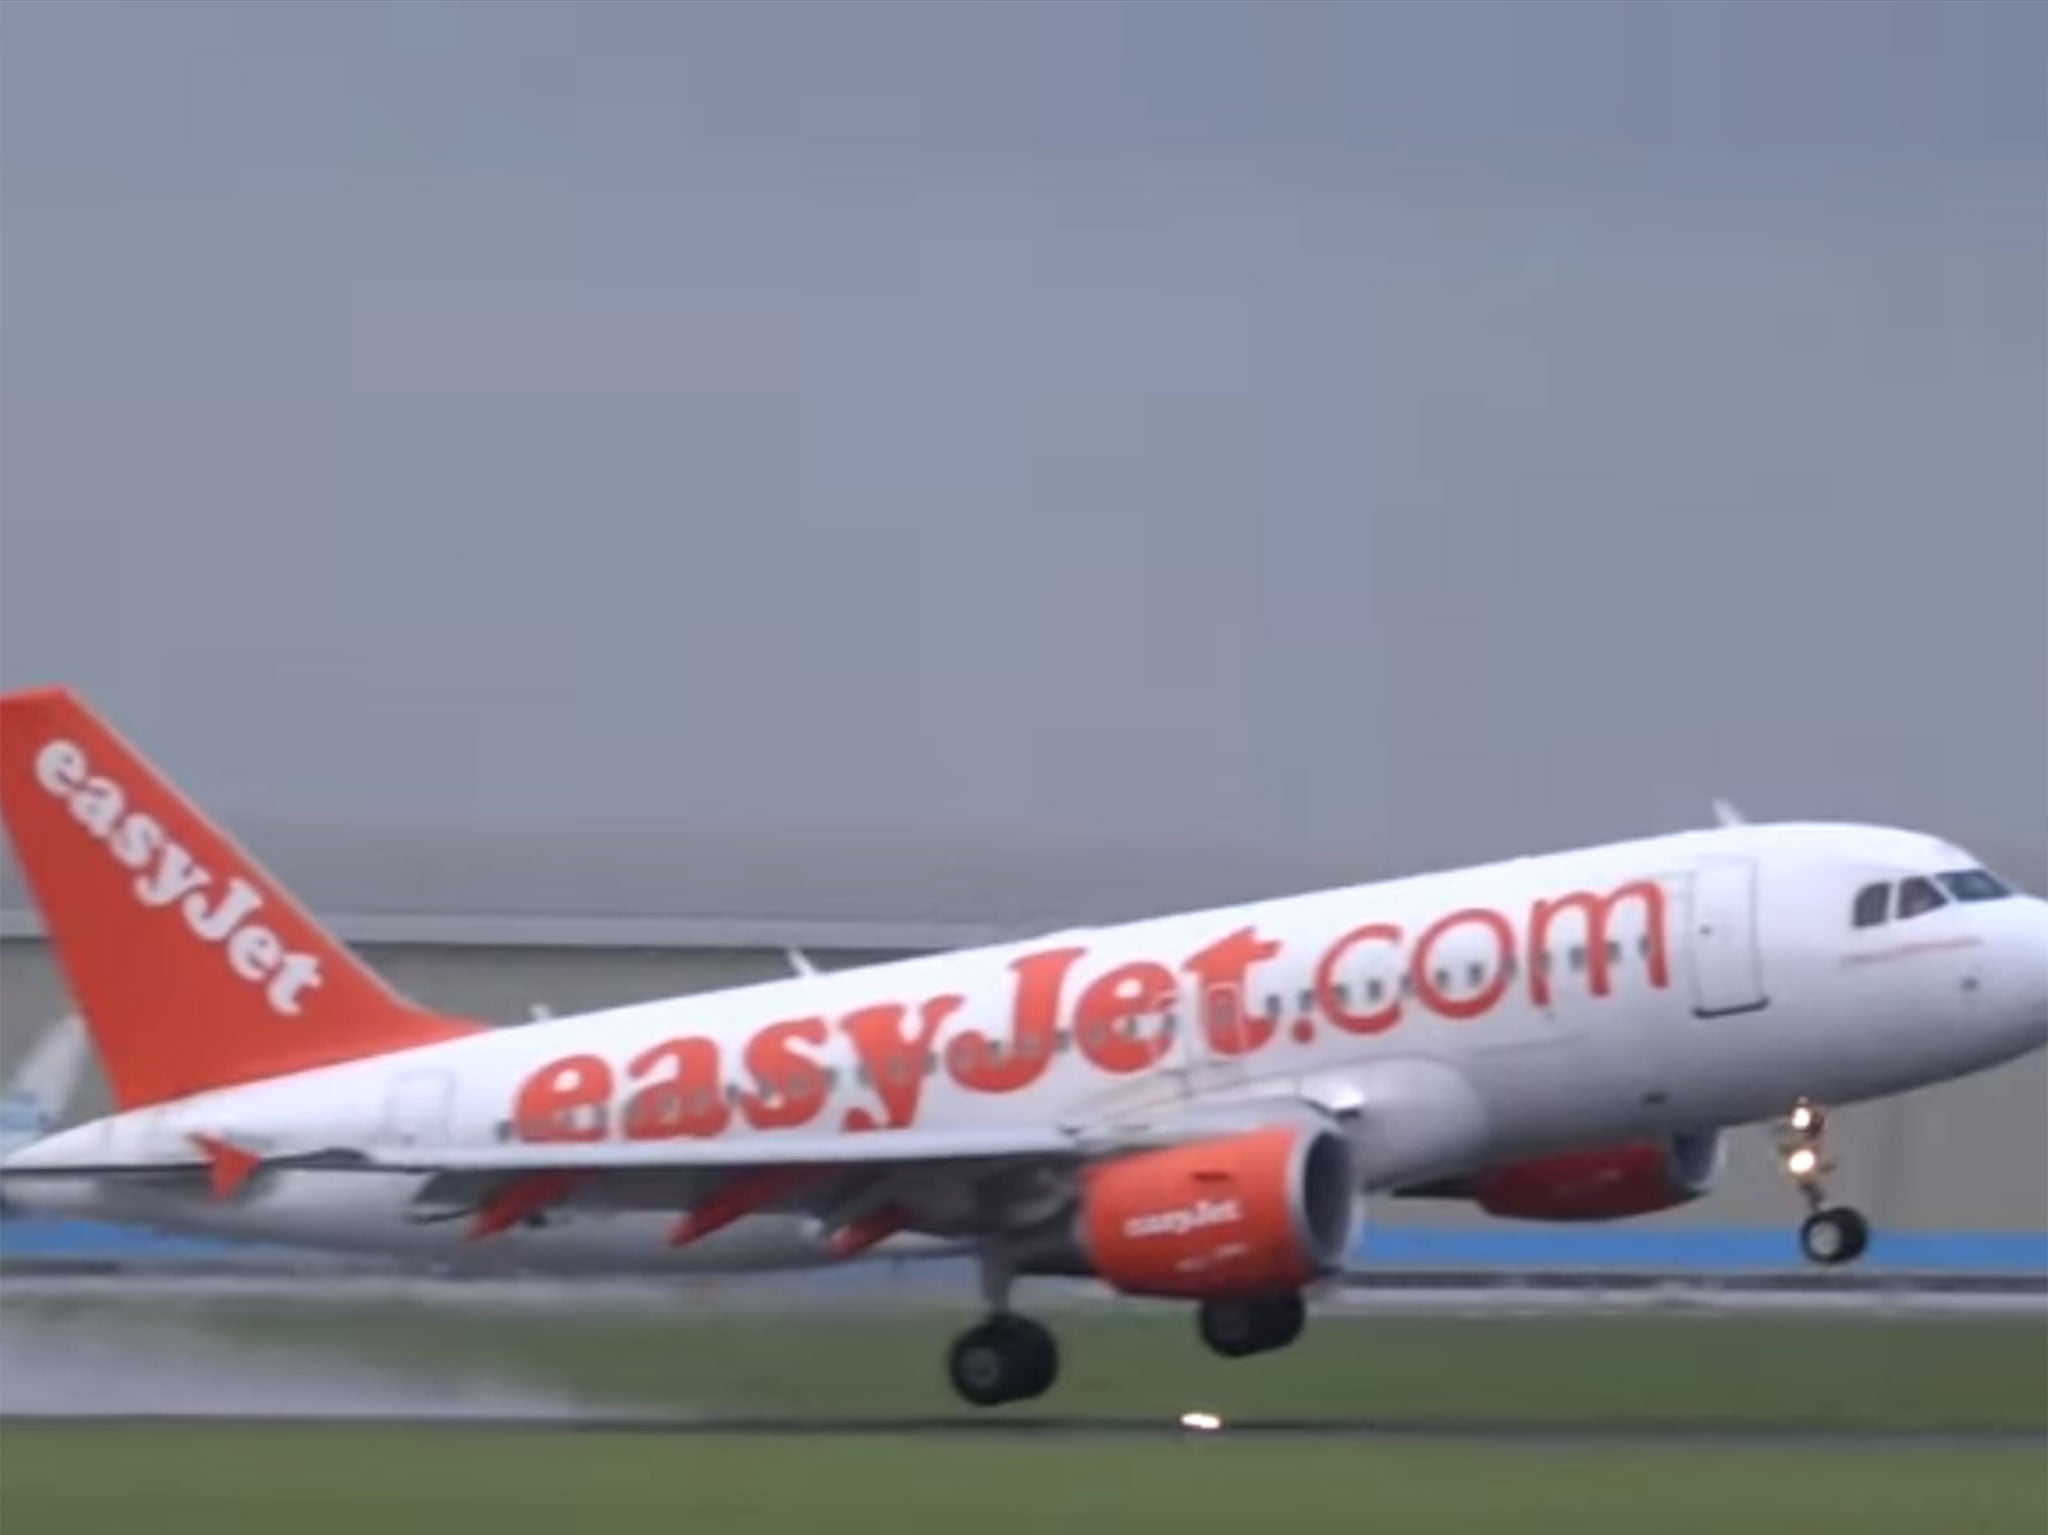 Watch an EasyJet plane abort its landing due to windy conditions.